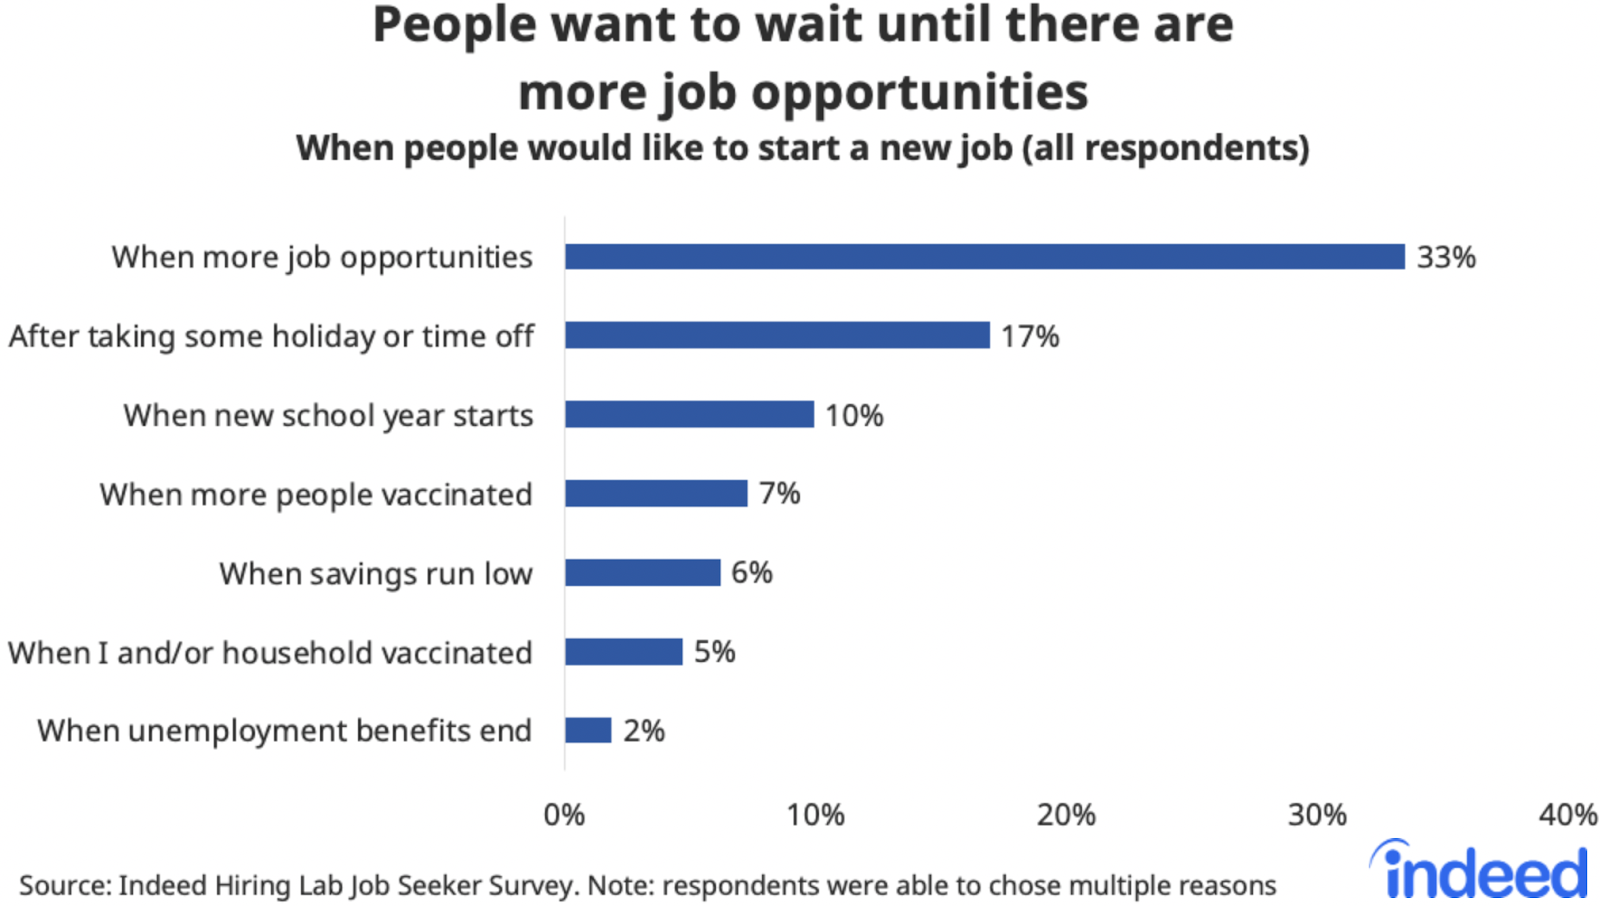 Bar graph titled “People want to wait until there are more job opportunities.” 